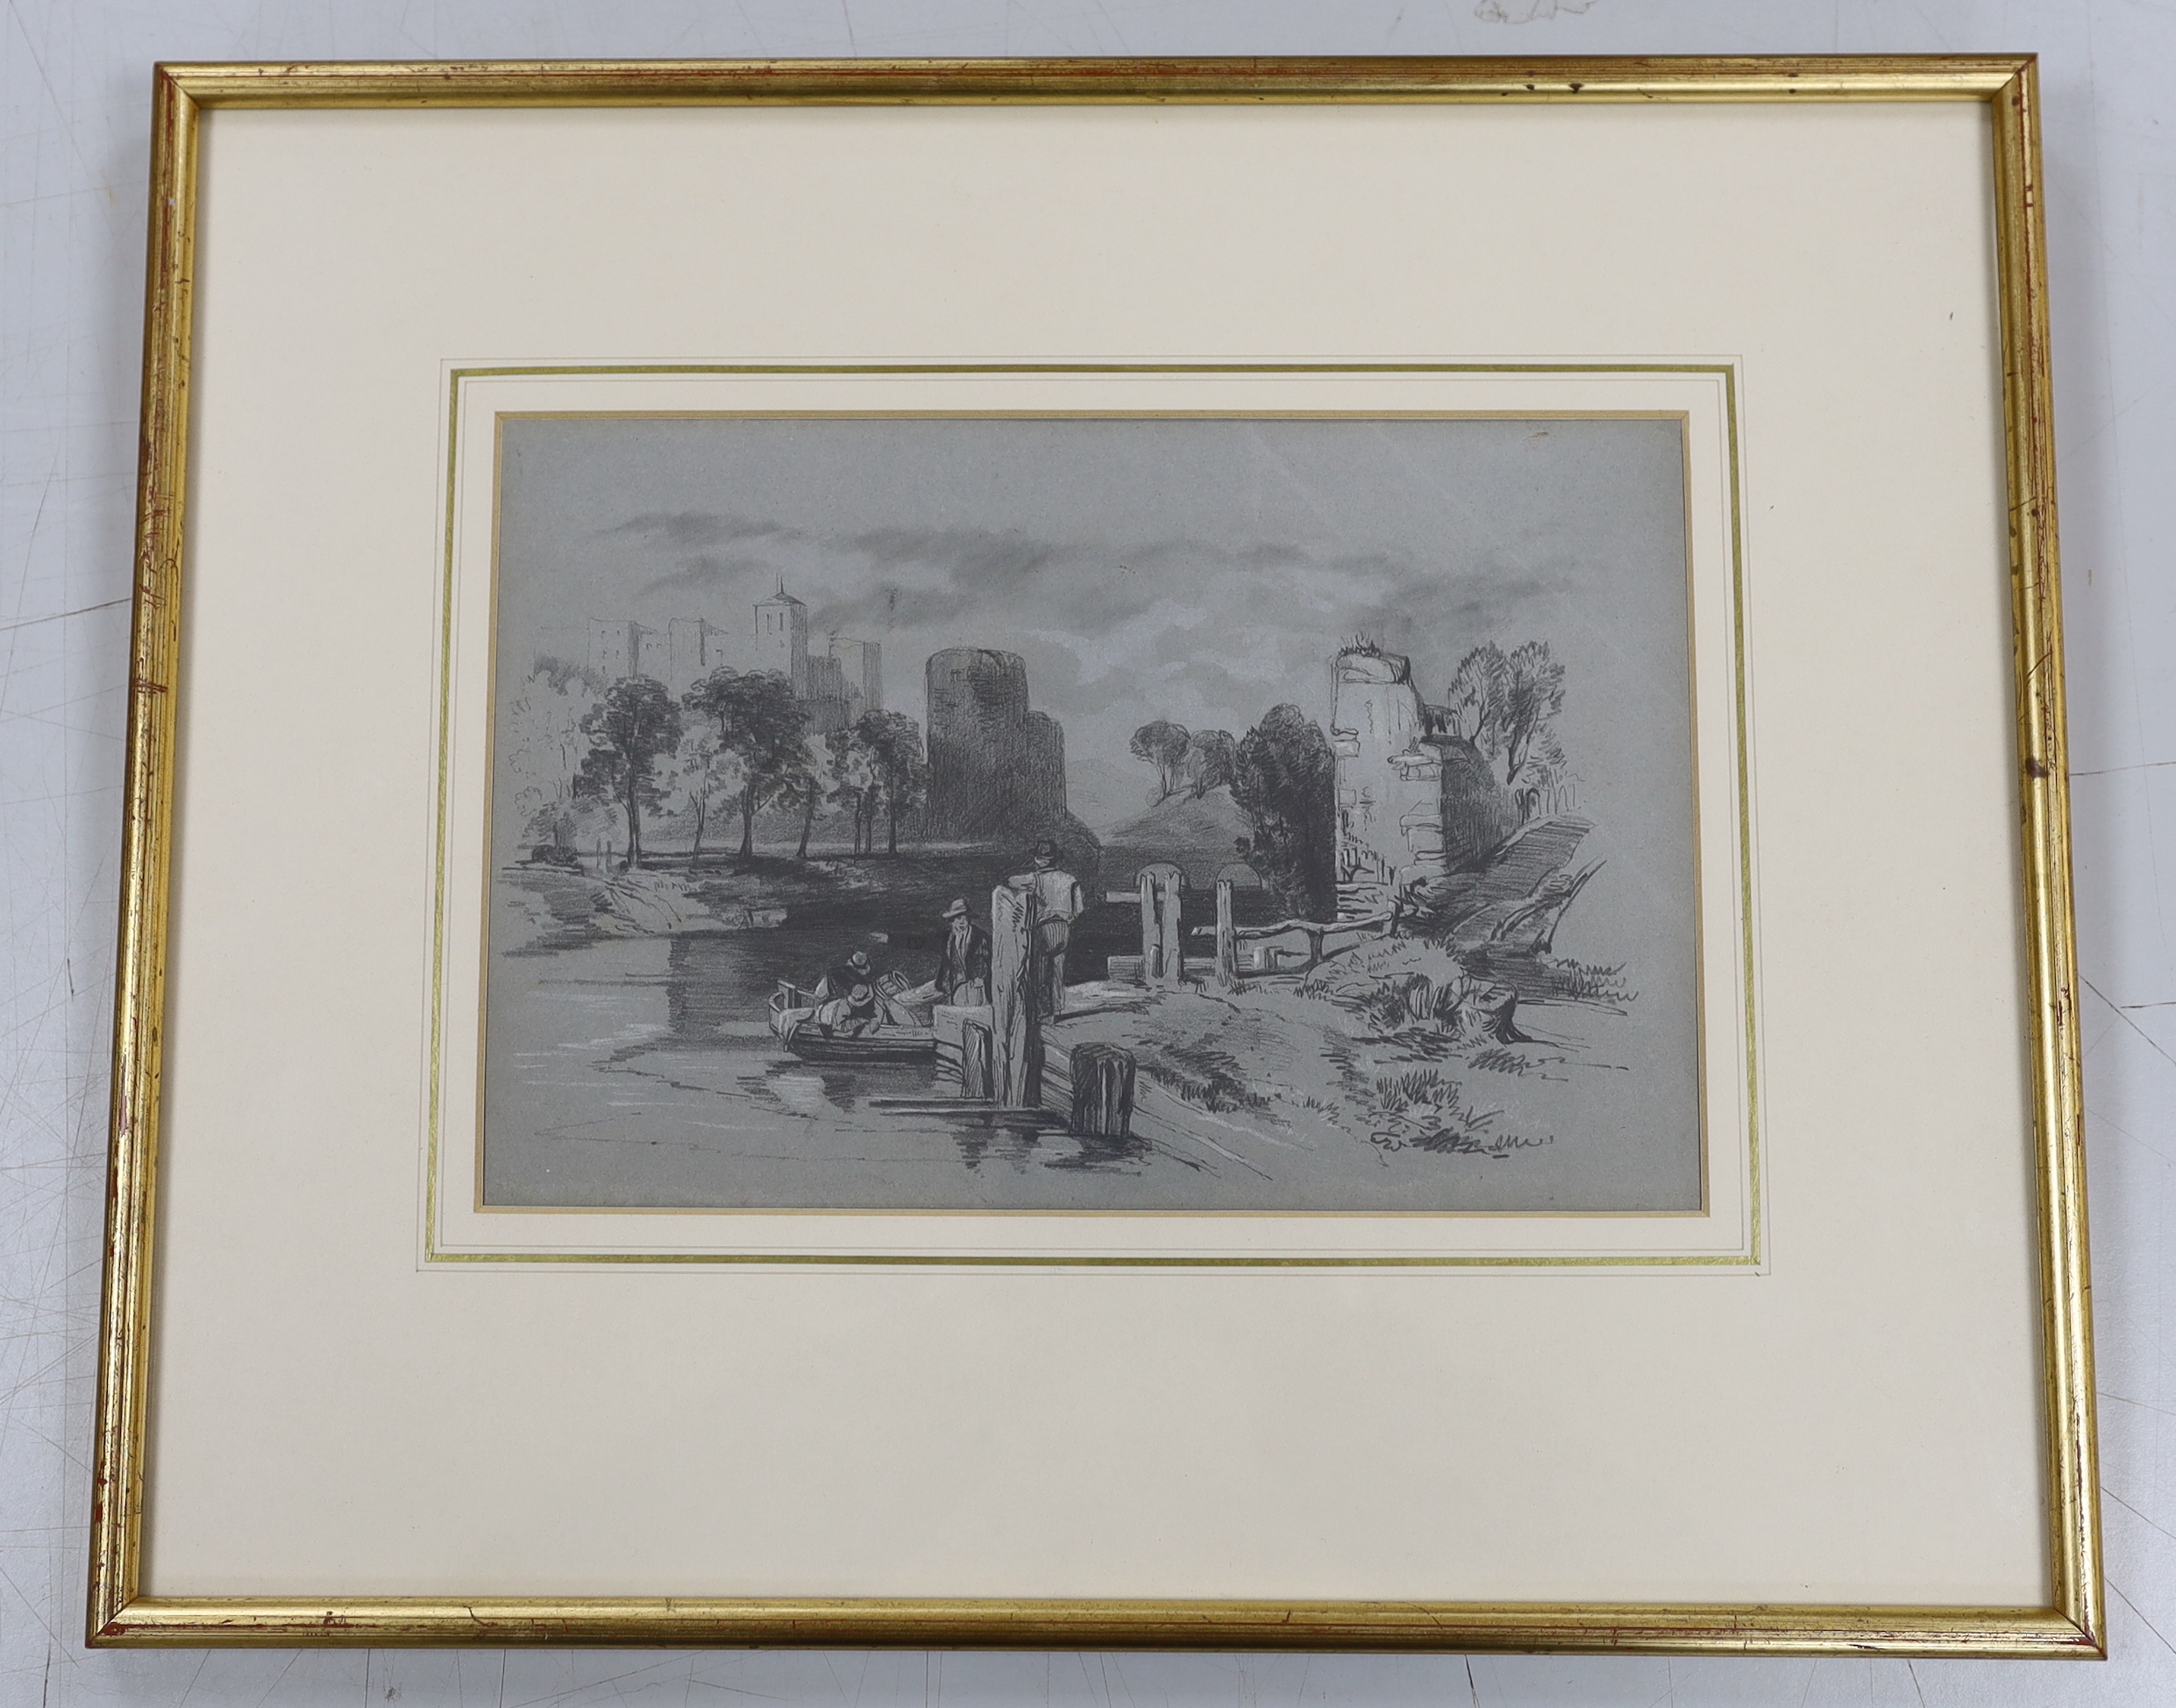 James Duffield Harding (1797-1863), pencil sketch, On the River Thames at Kew, inscribed verso 'Bought from Abbott & Holder 1984', 18 x 27cm